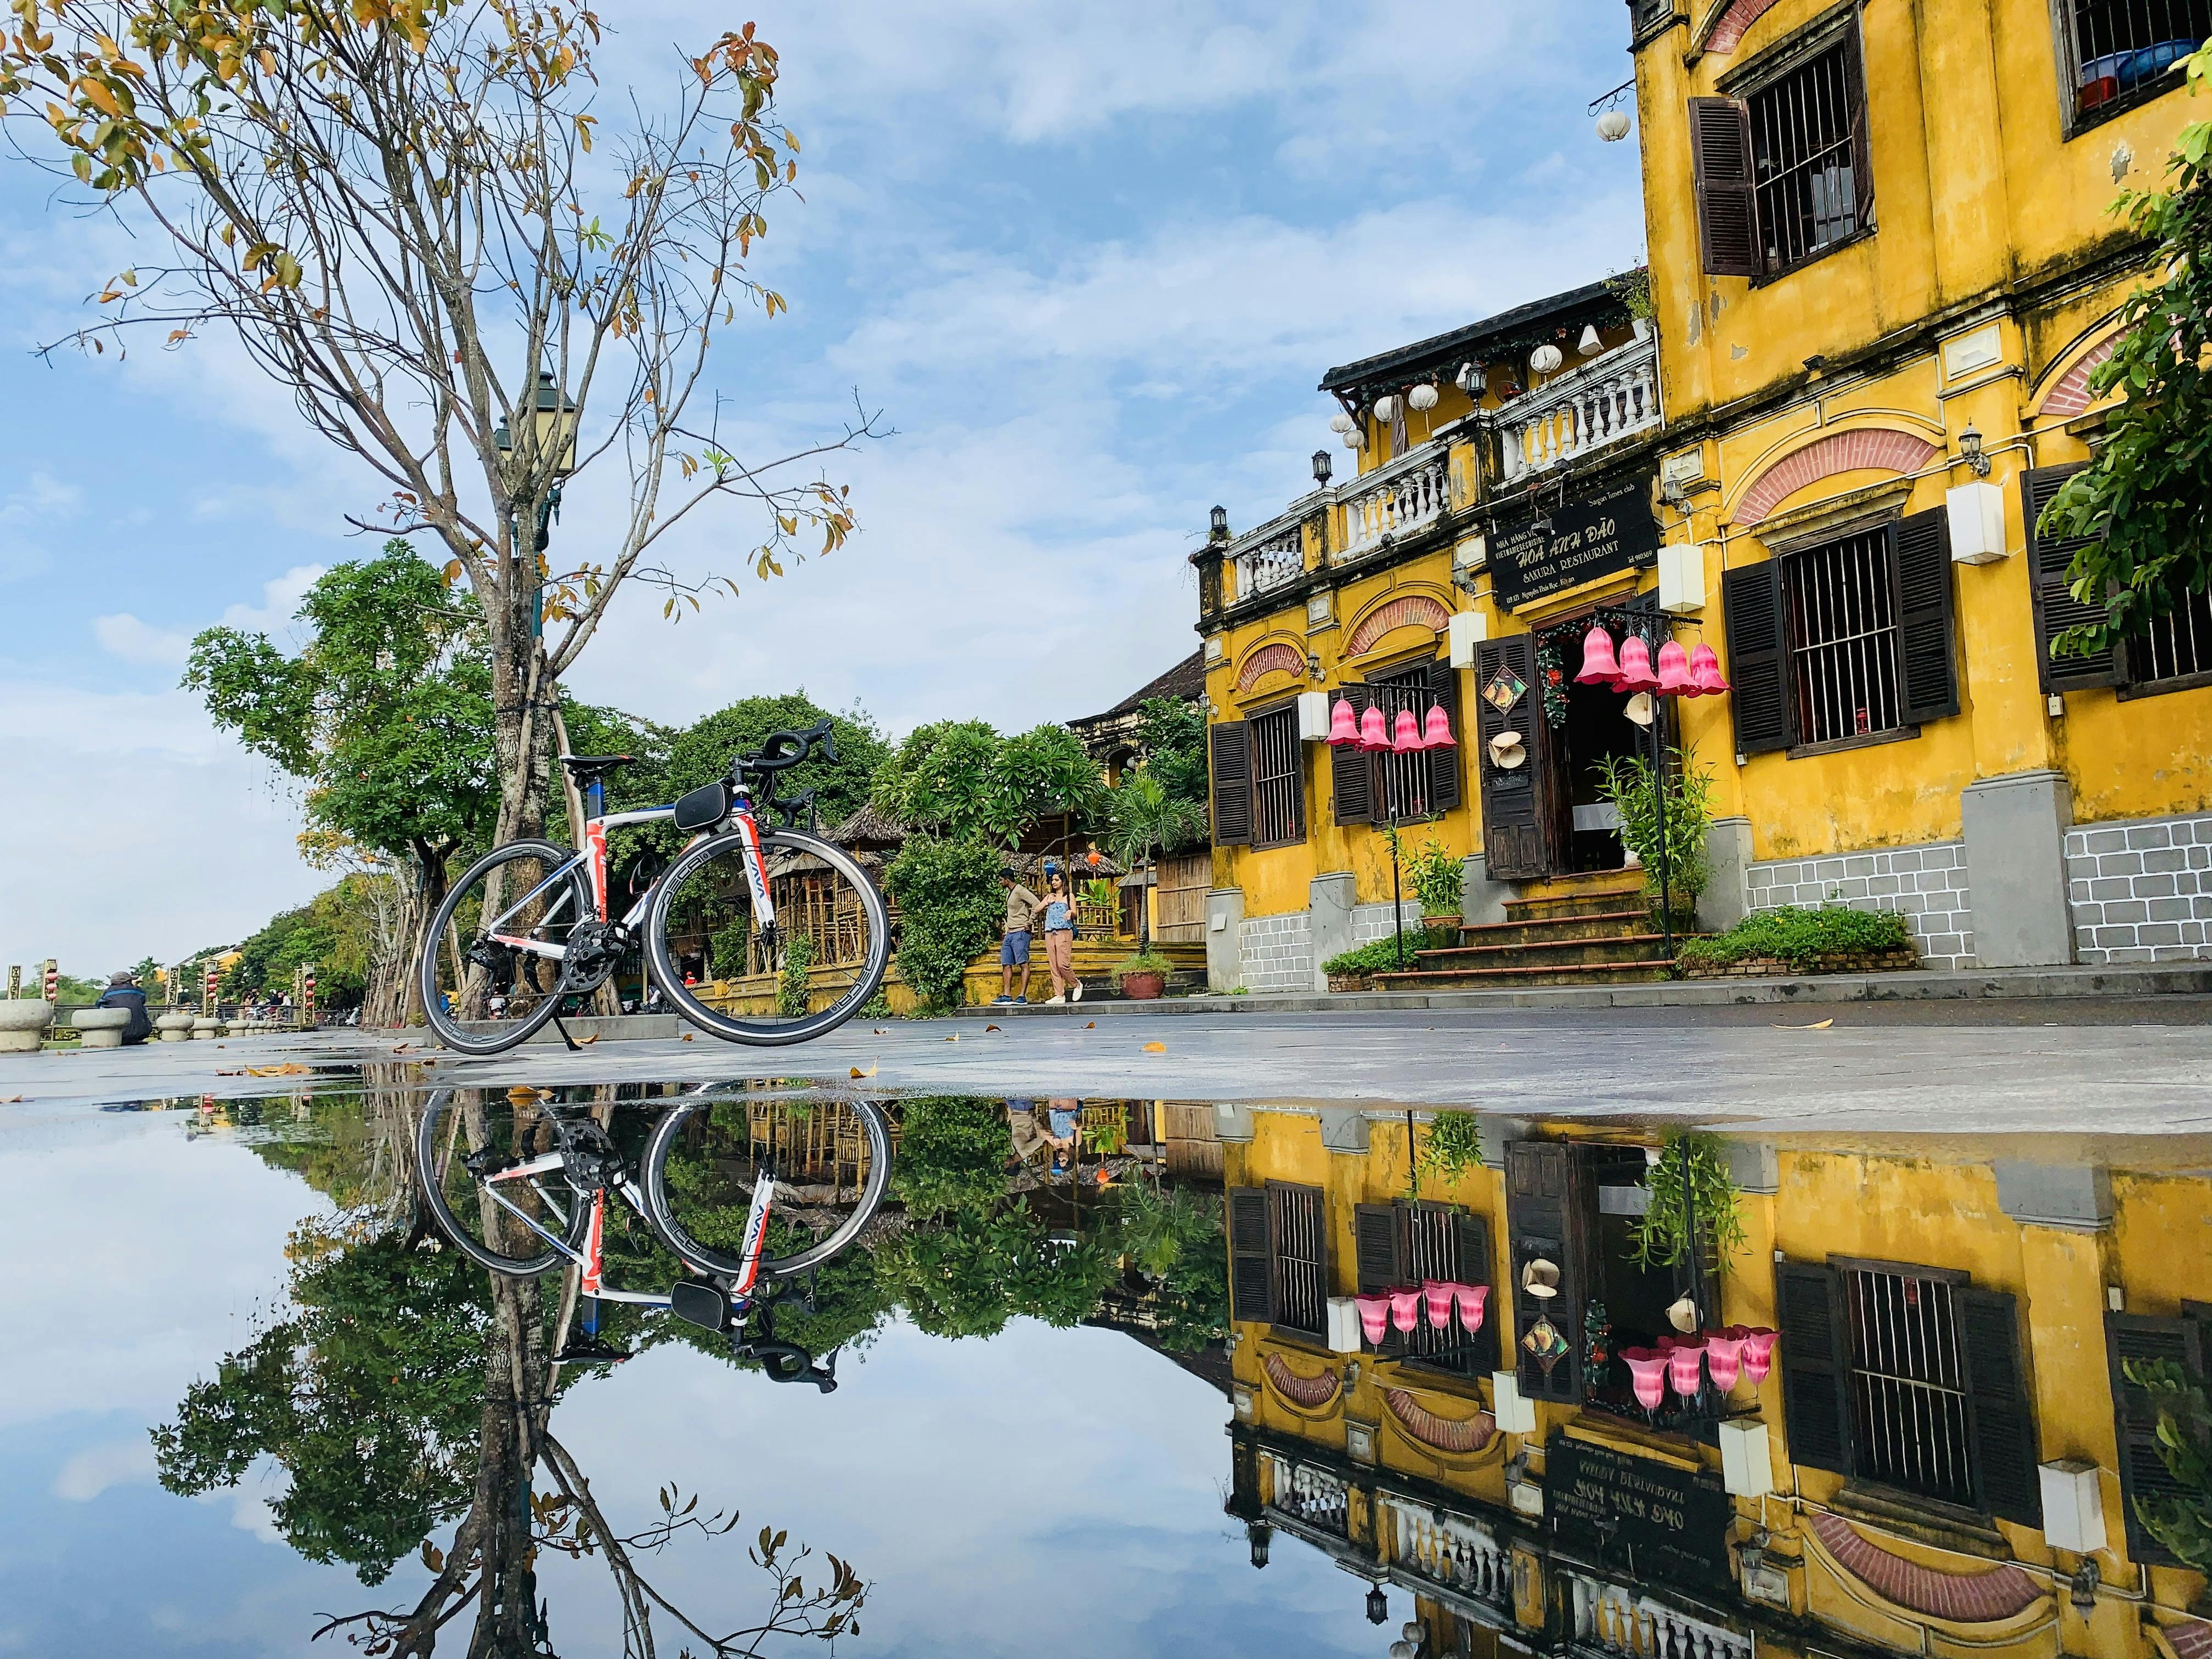 Hoi An ancient town guided walking tour